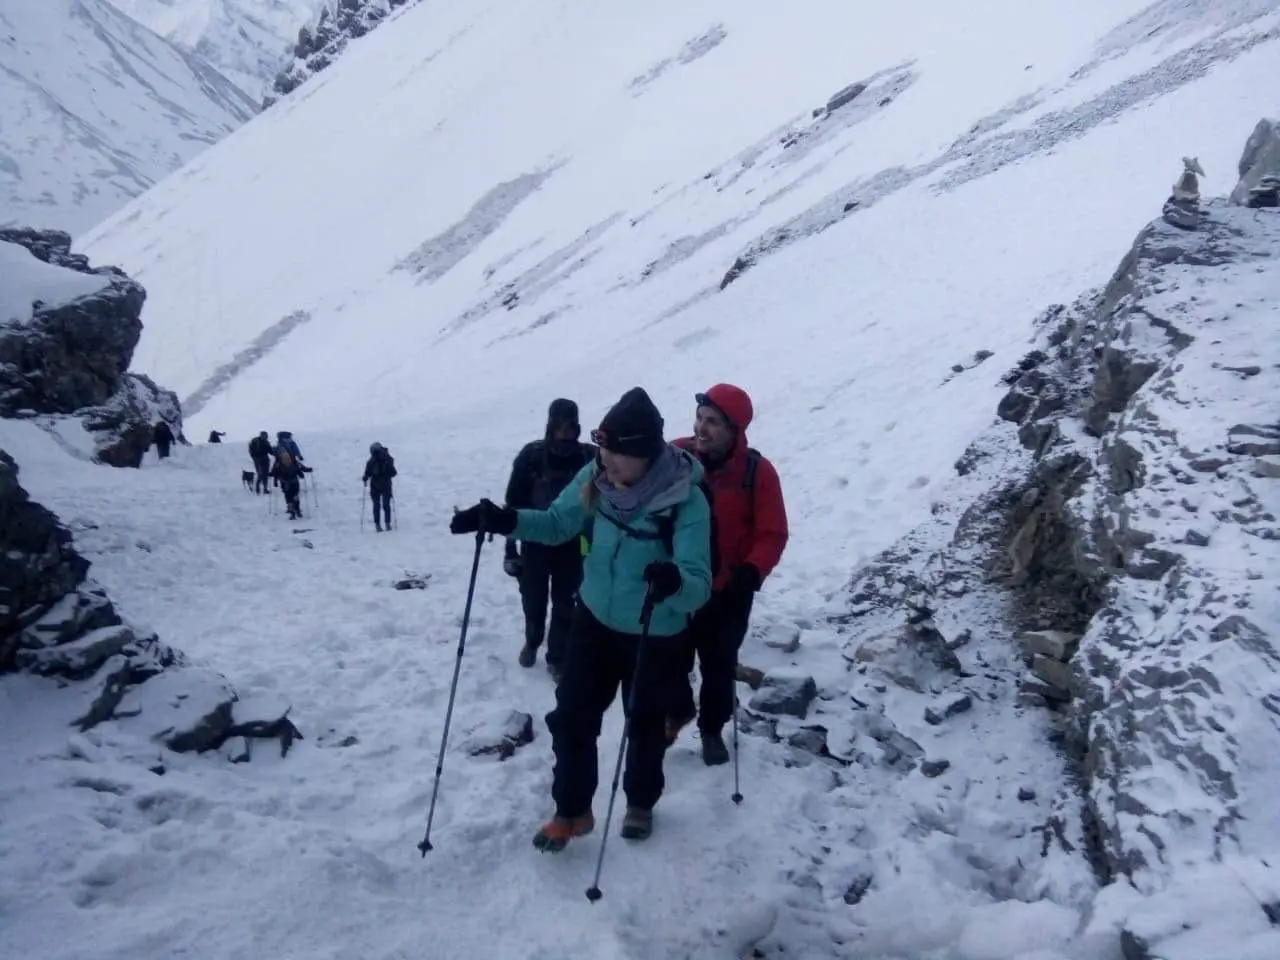 Avalanche Hits the Annapurna Base Camp Trails Nepal 2020 - 7 Trekkers are still Missing